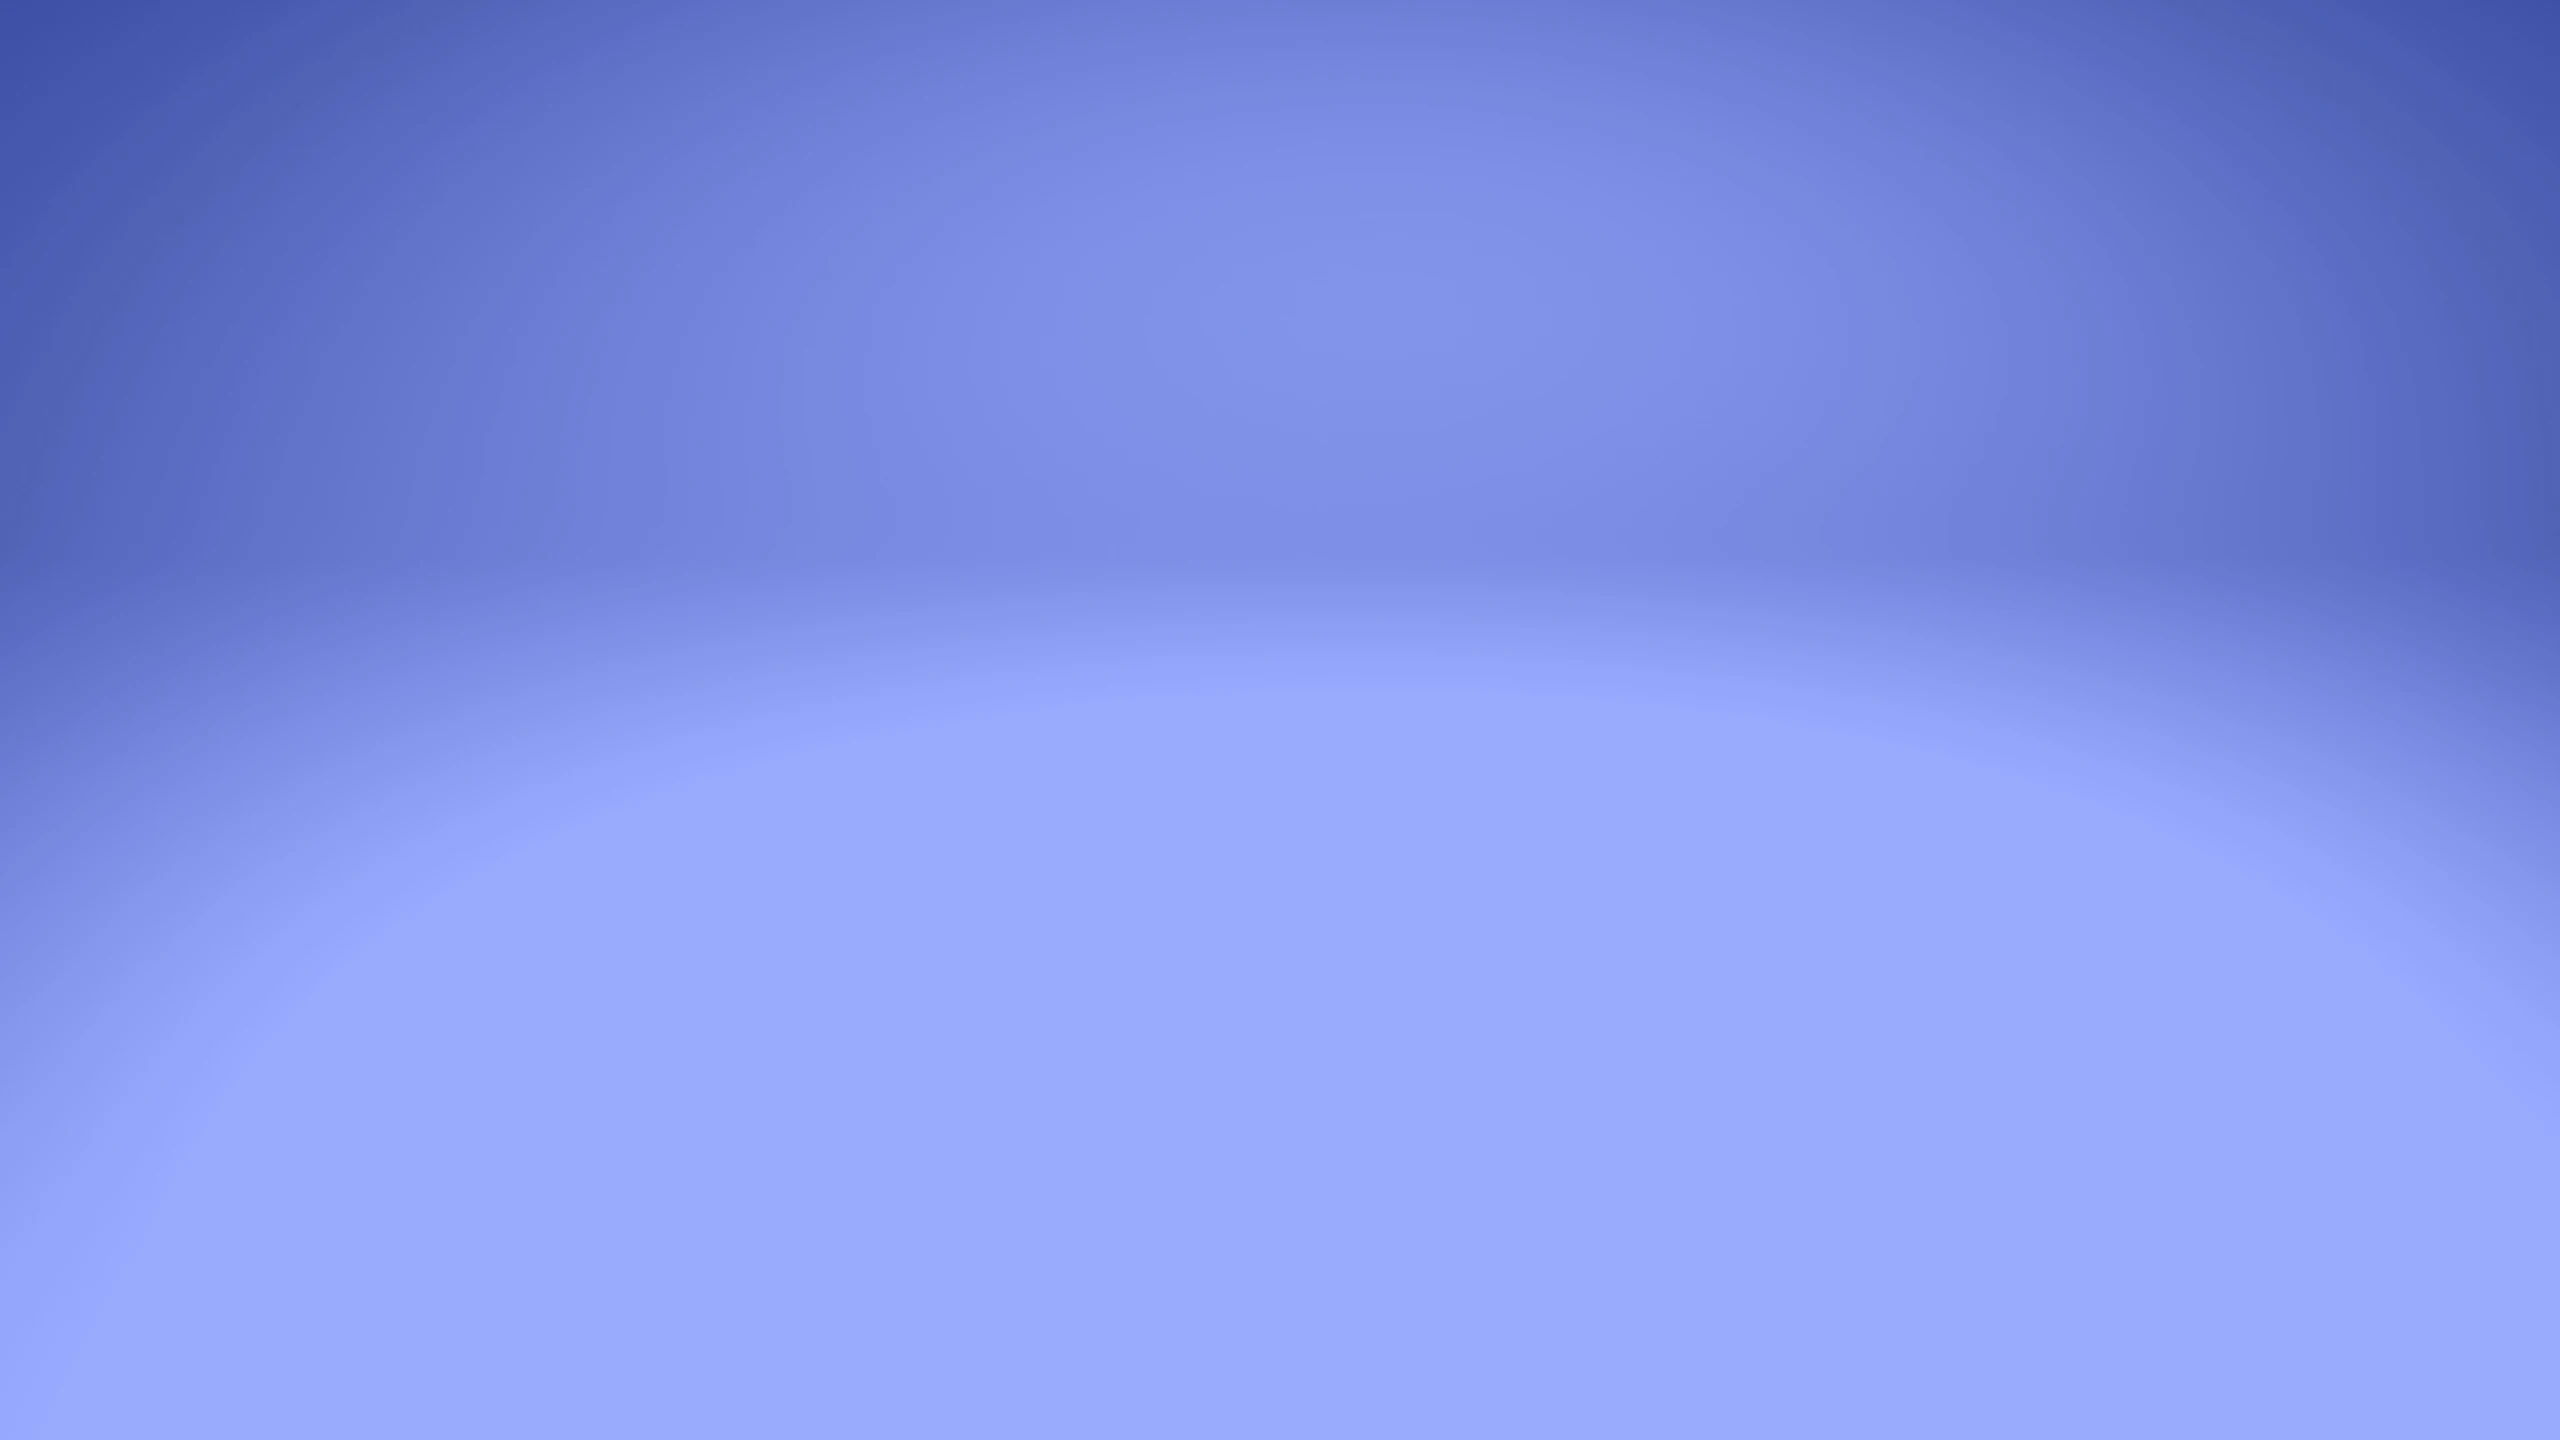 an orange is sitting on a blue background